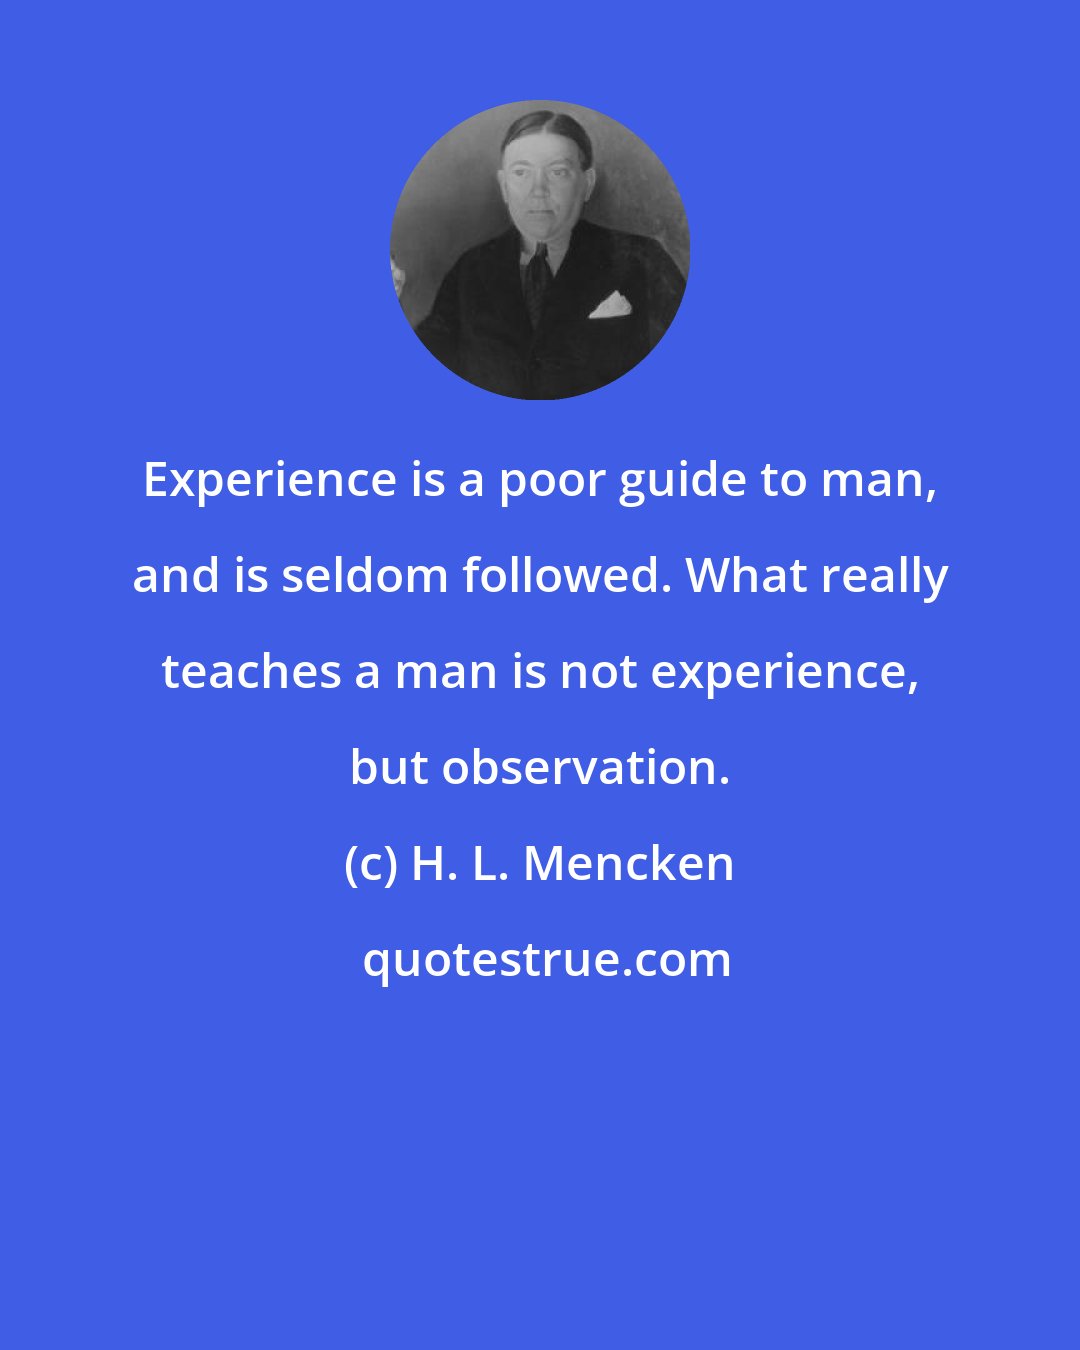 H. L. Mencken: Experience is a poor guide to man, and is seldom followed. What really teaches a man is not experience, but observation.